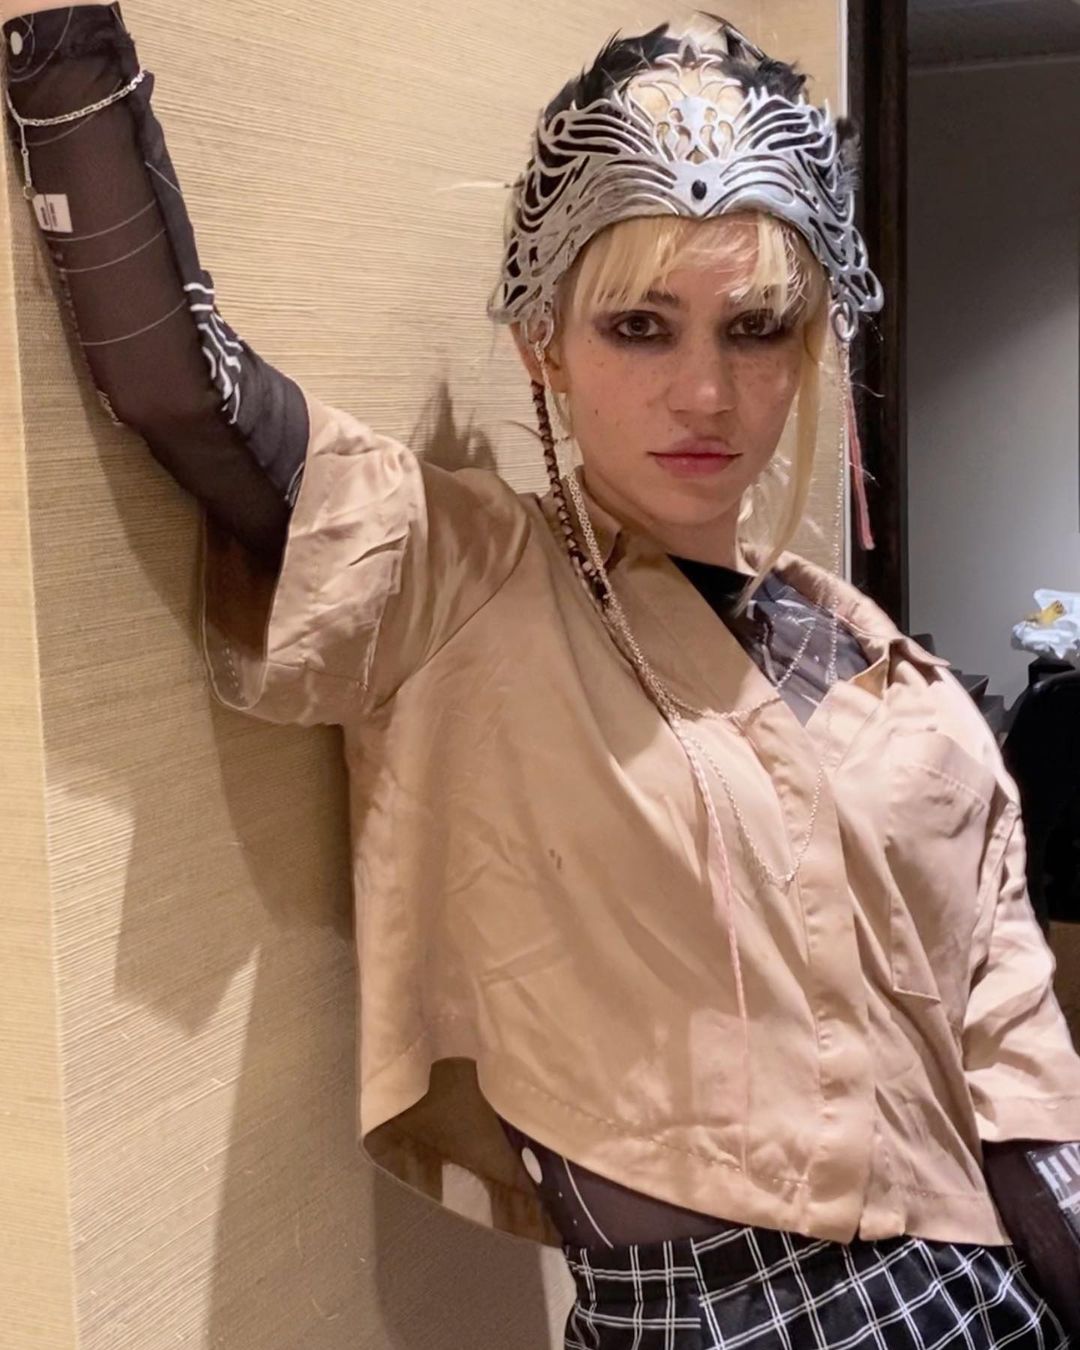 Musician Grimes Is Ready for Space Travel With Full Back “Alien Scar